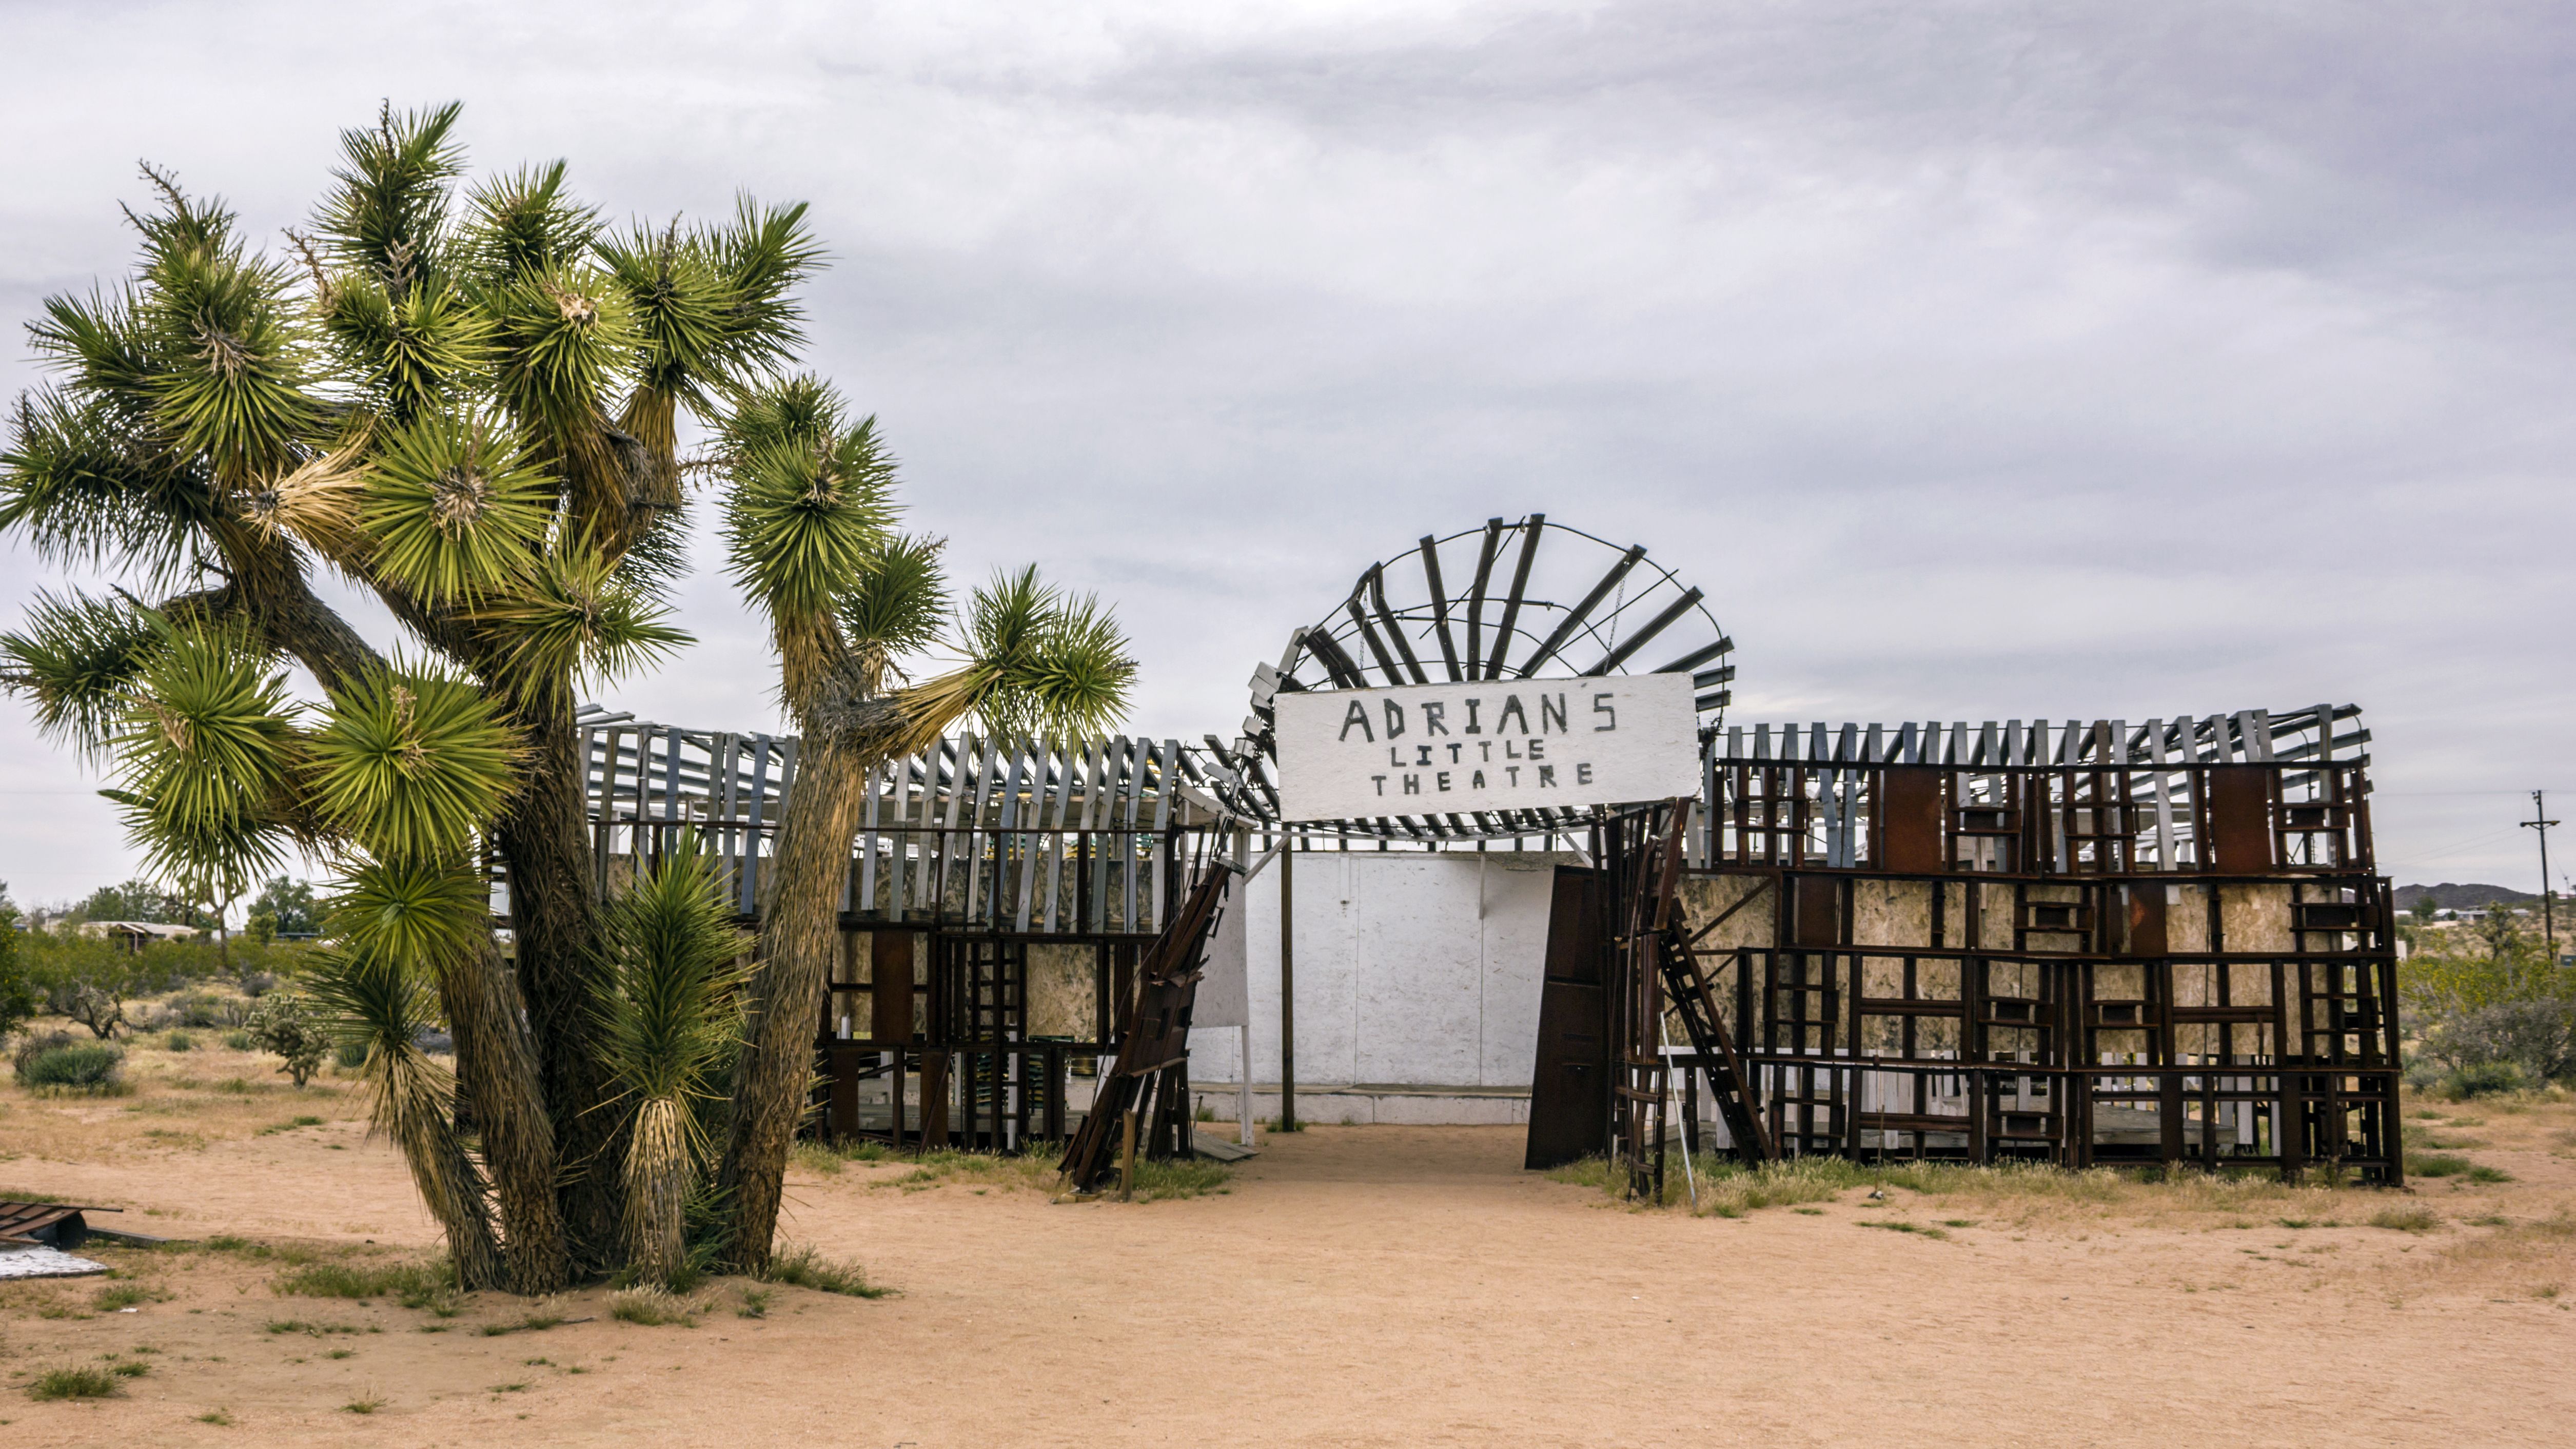 How to make the most of Joshua Tree on your visit